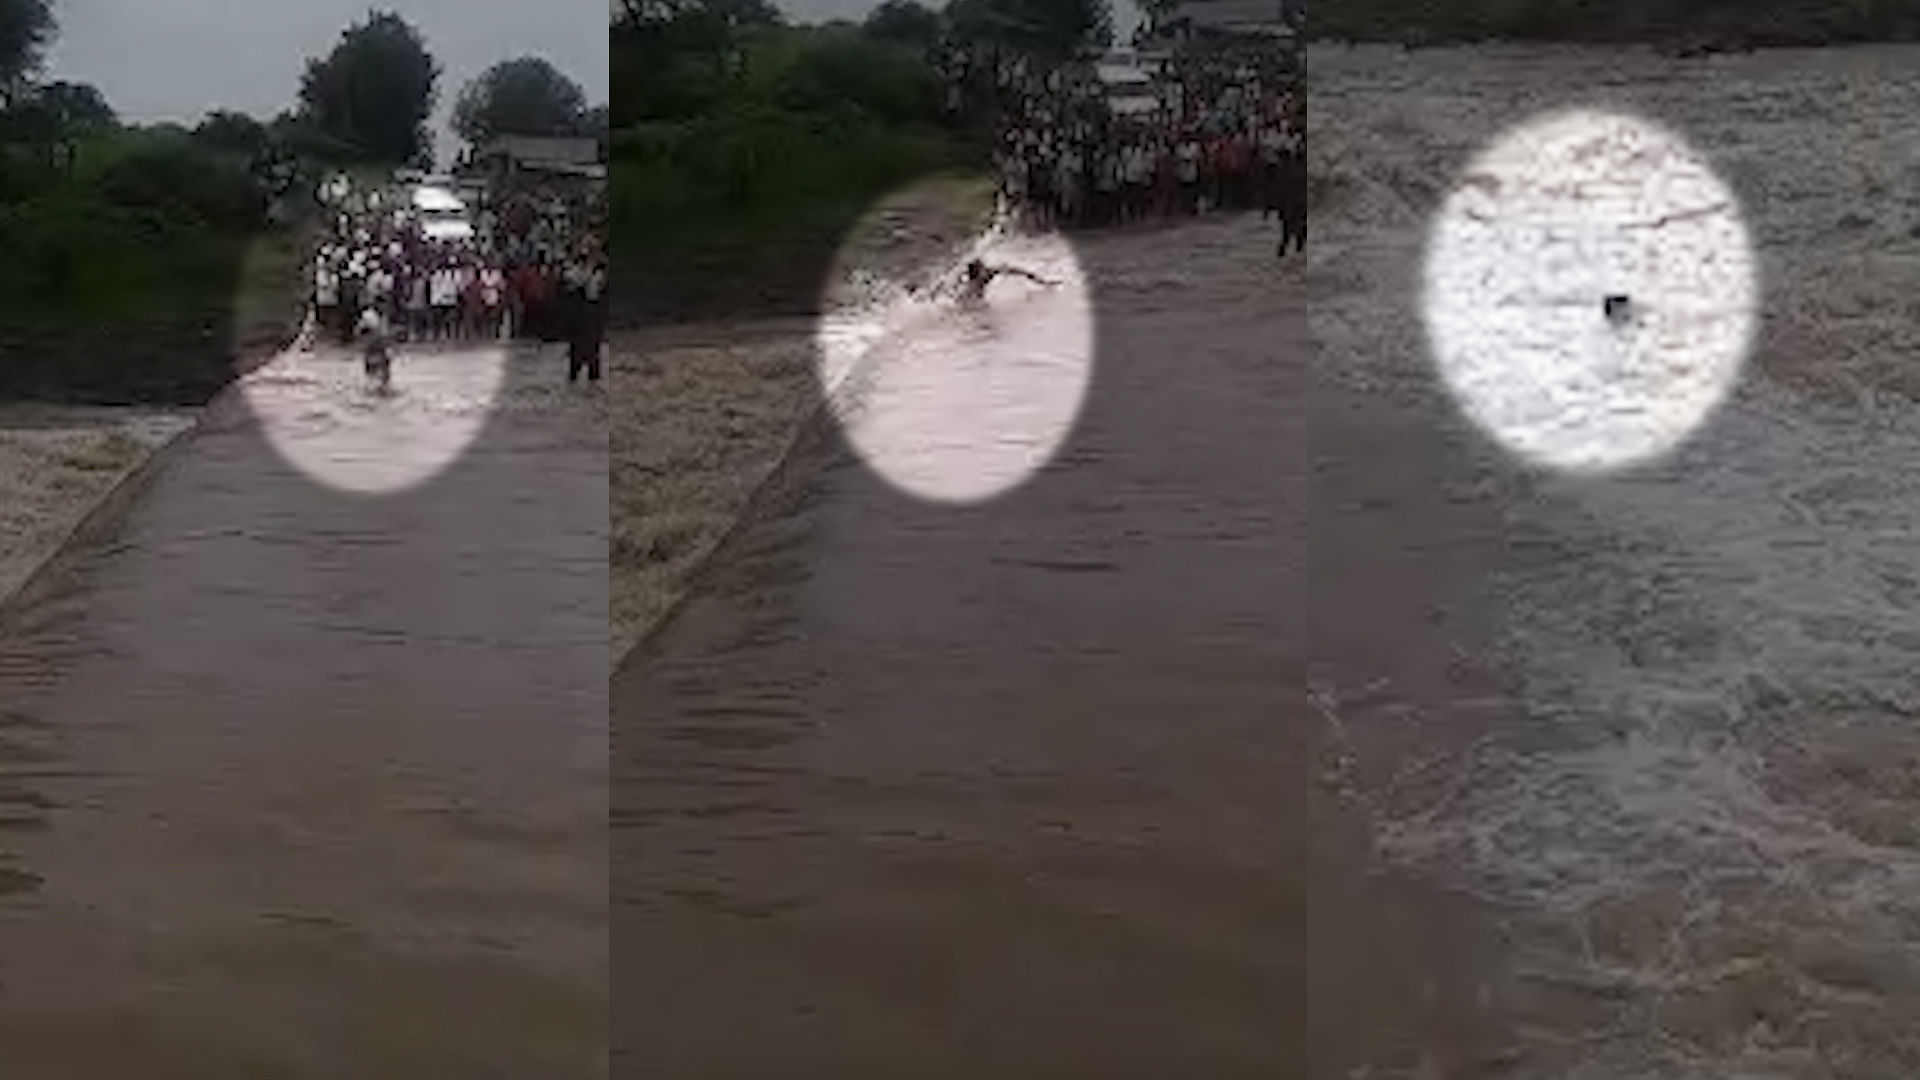 A youth in Jhiriniya village of Khargone district in Madhya Pradesh was swept away while attempting to cross a bridge. The incident was caught on camera.